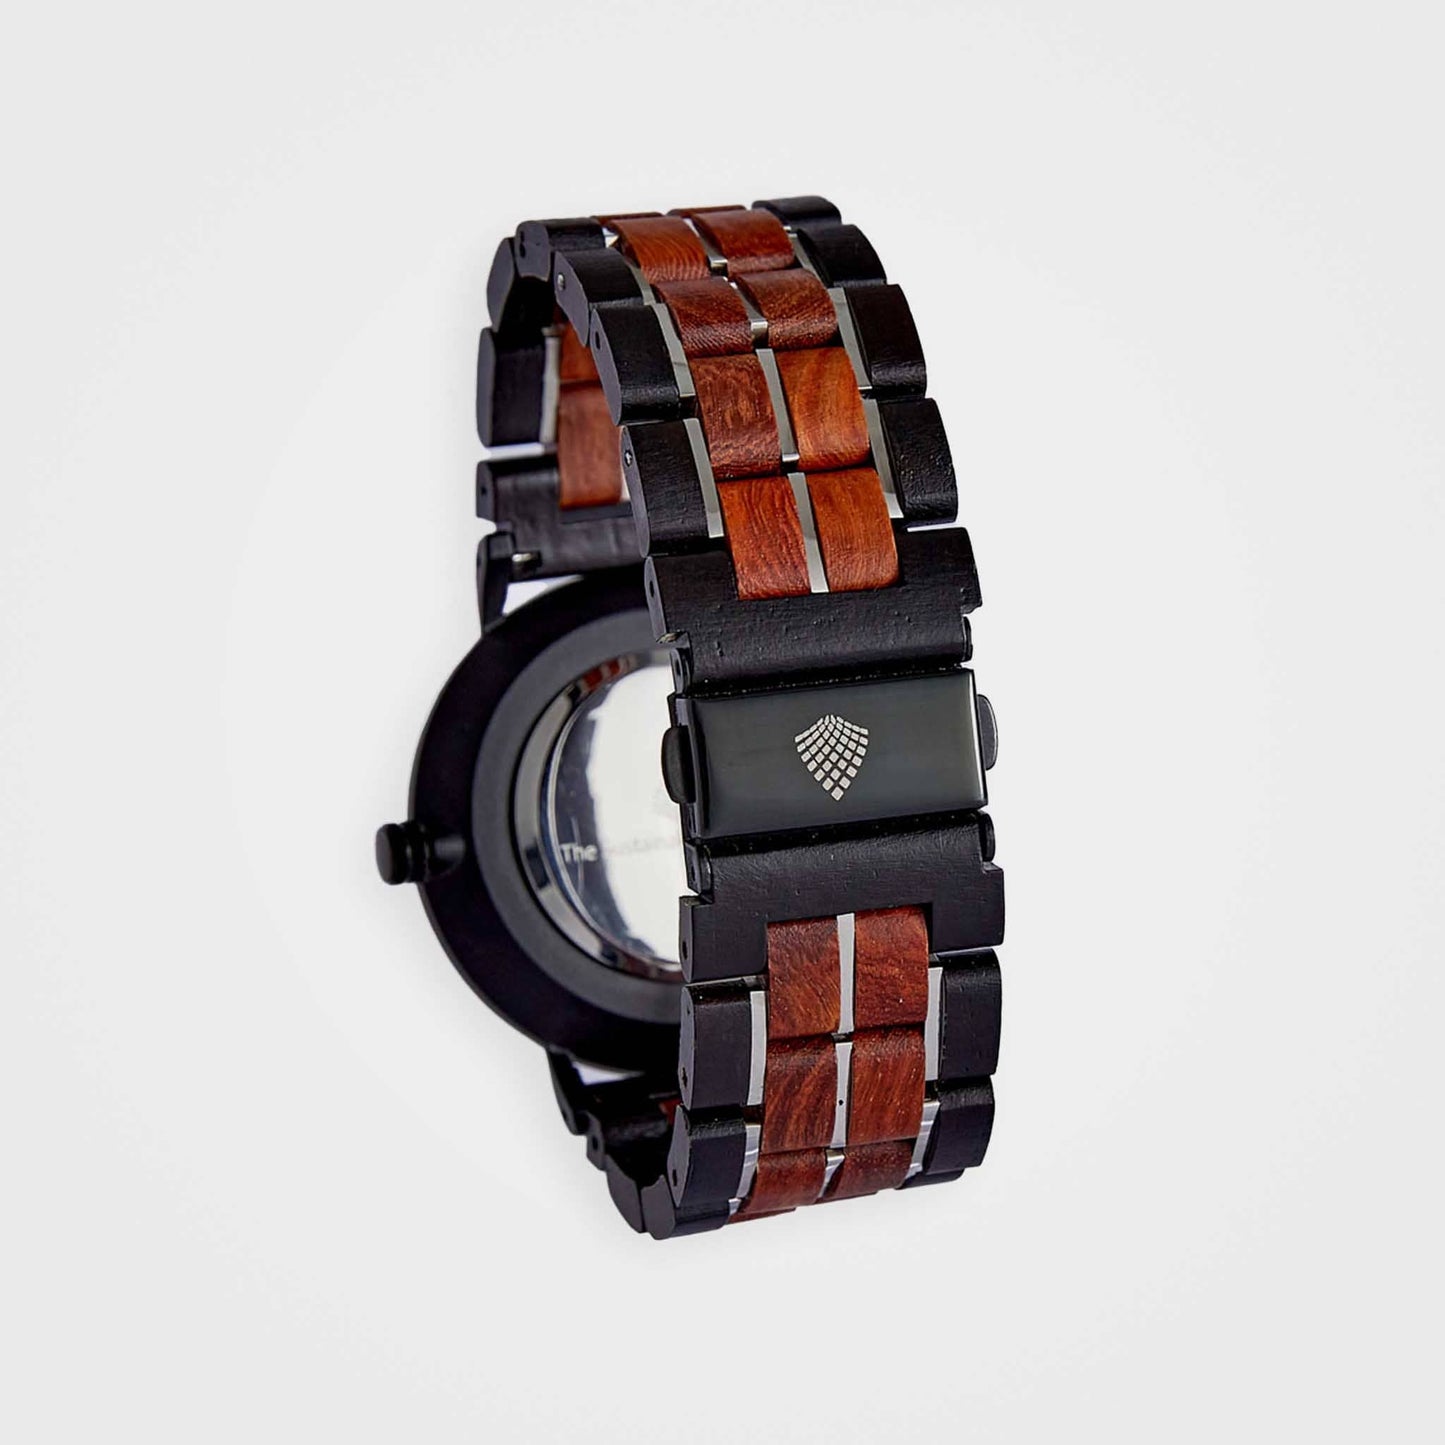 Recycled & Handcrafted Wood Watch For Men: The Rowan